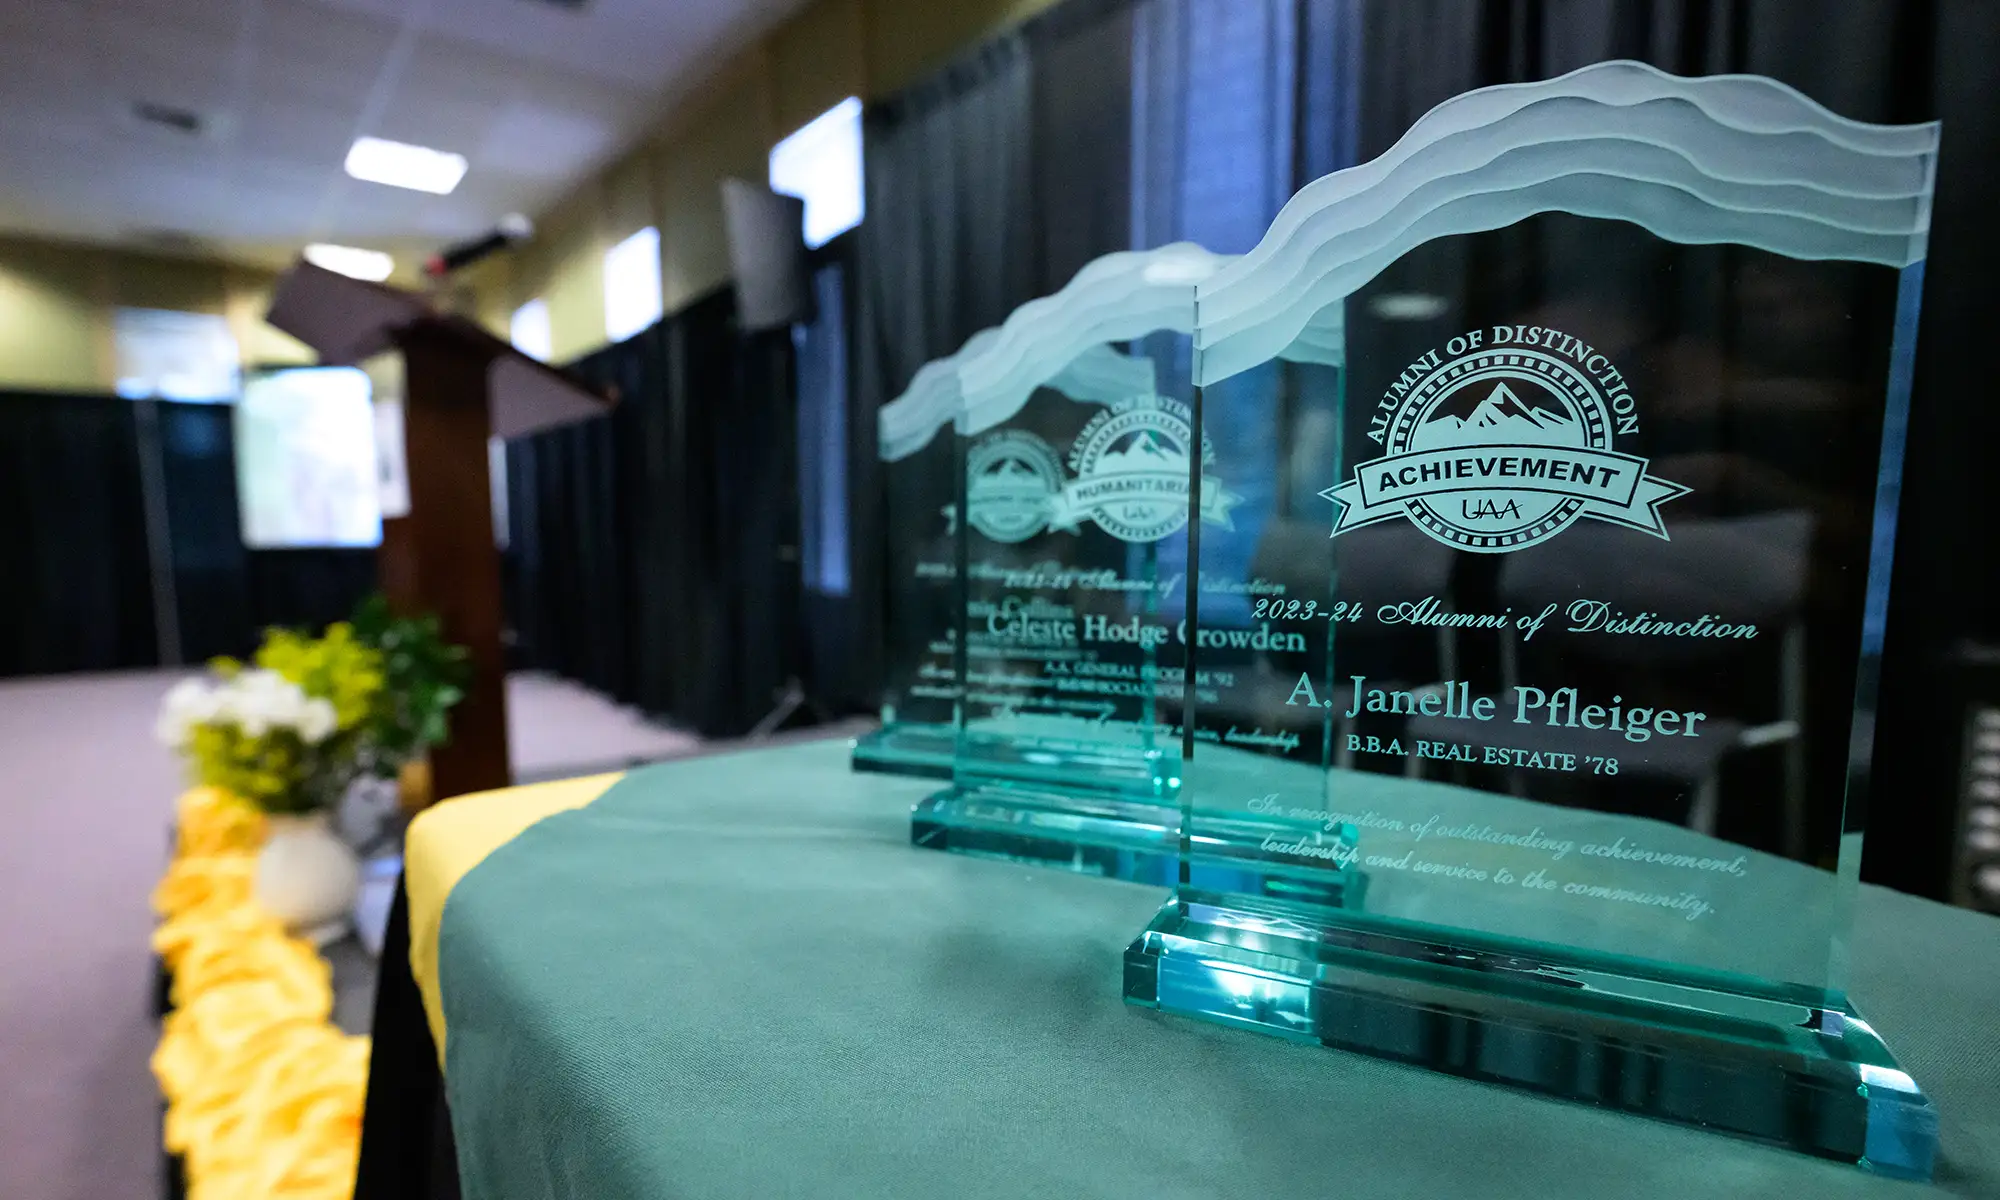 close view of three glass UAA Alumni of Achievement trophies awarded to Amie Collins, Celeste Hodge Growden, and A. Janelle Pfleiger lined on a table; a podium and small stage are visible in the background